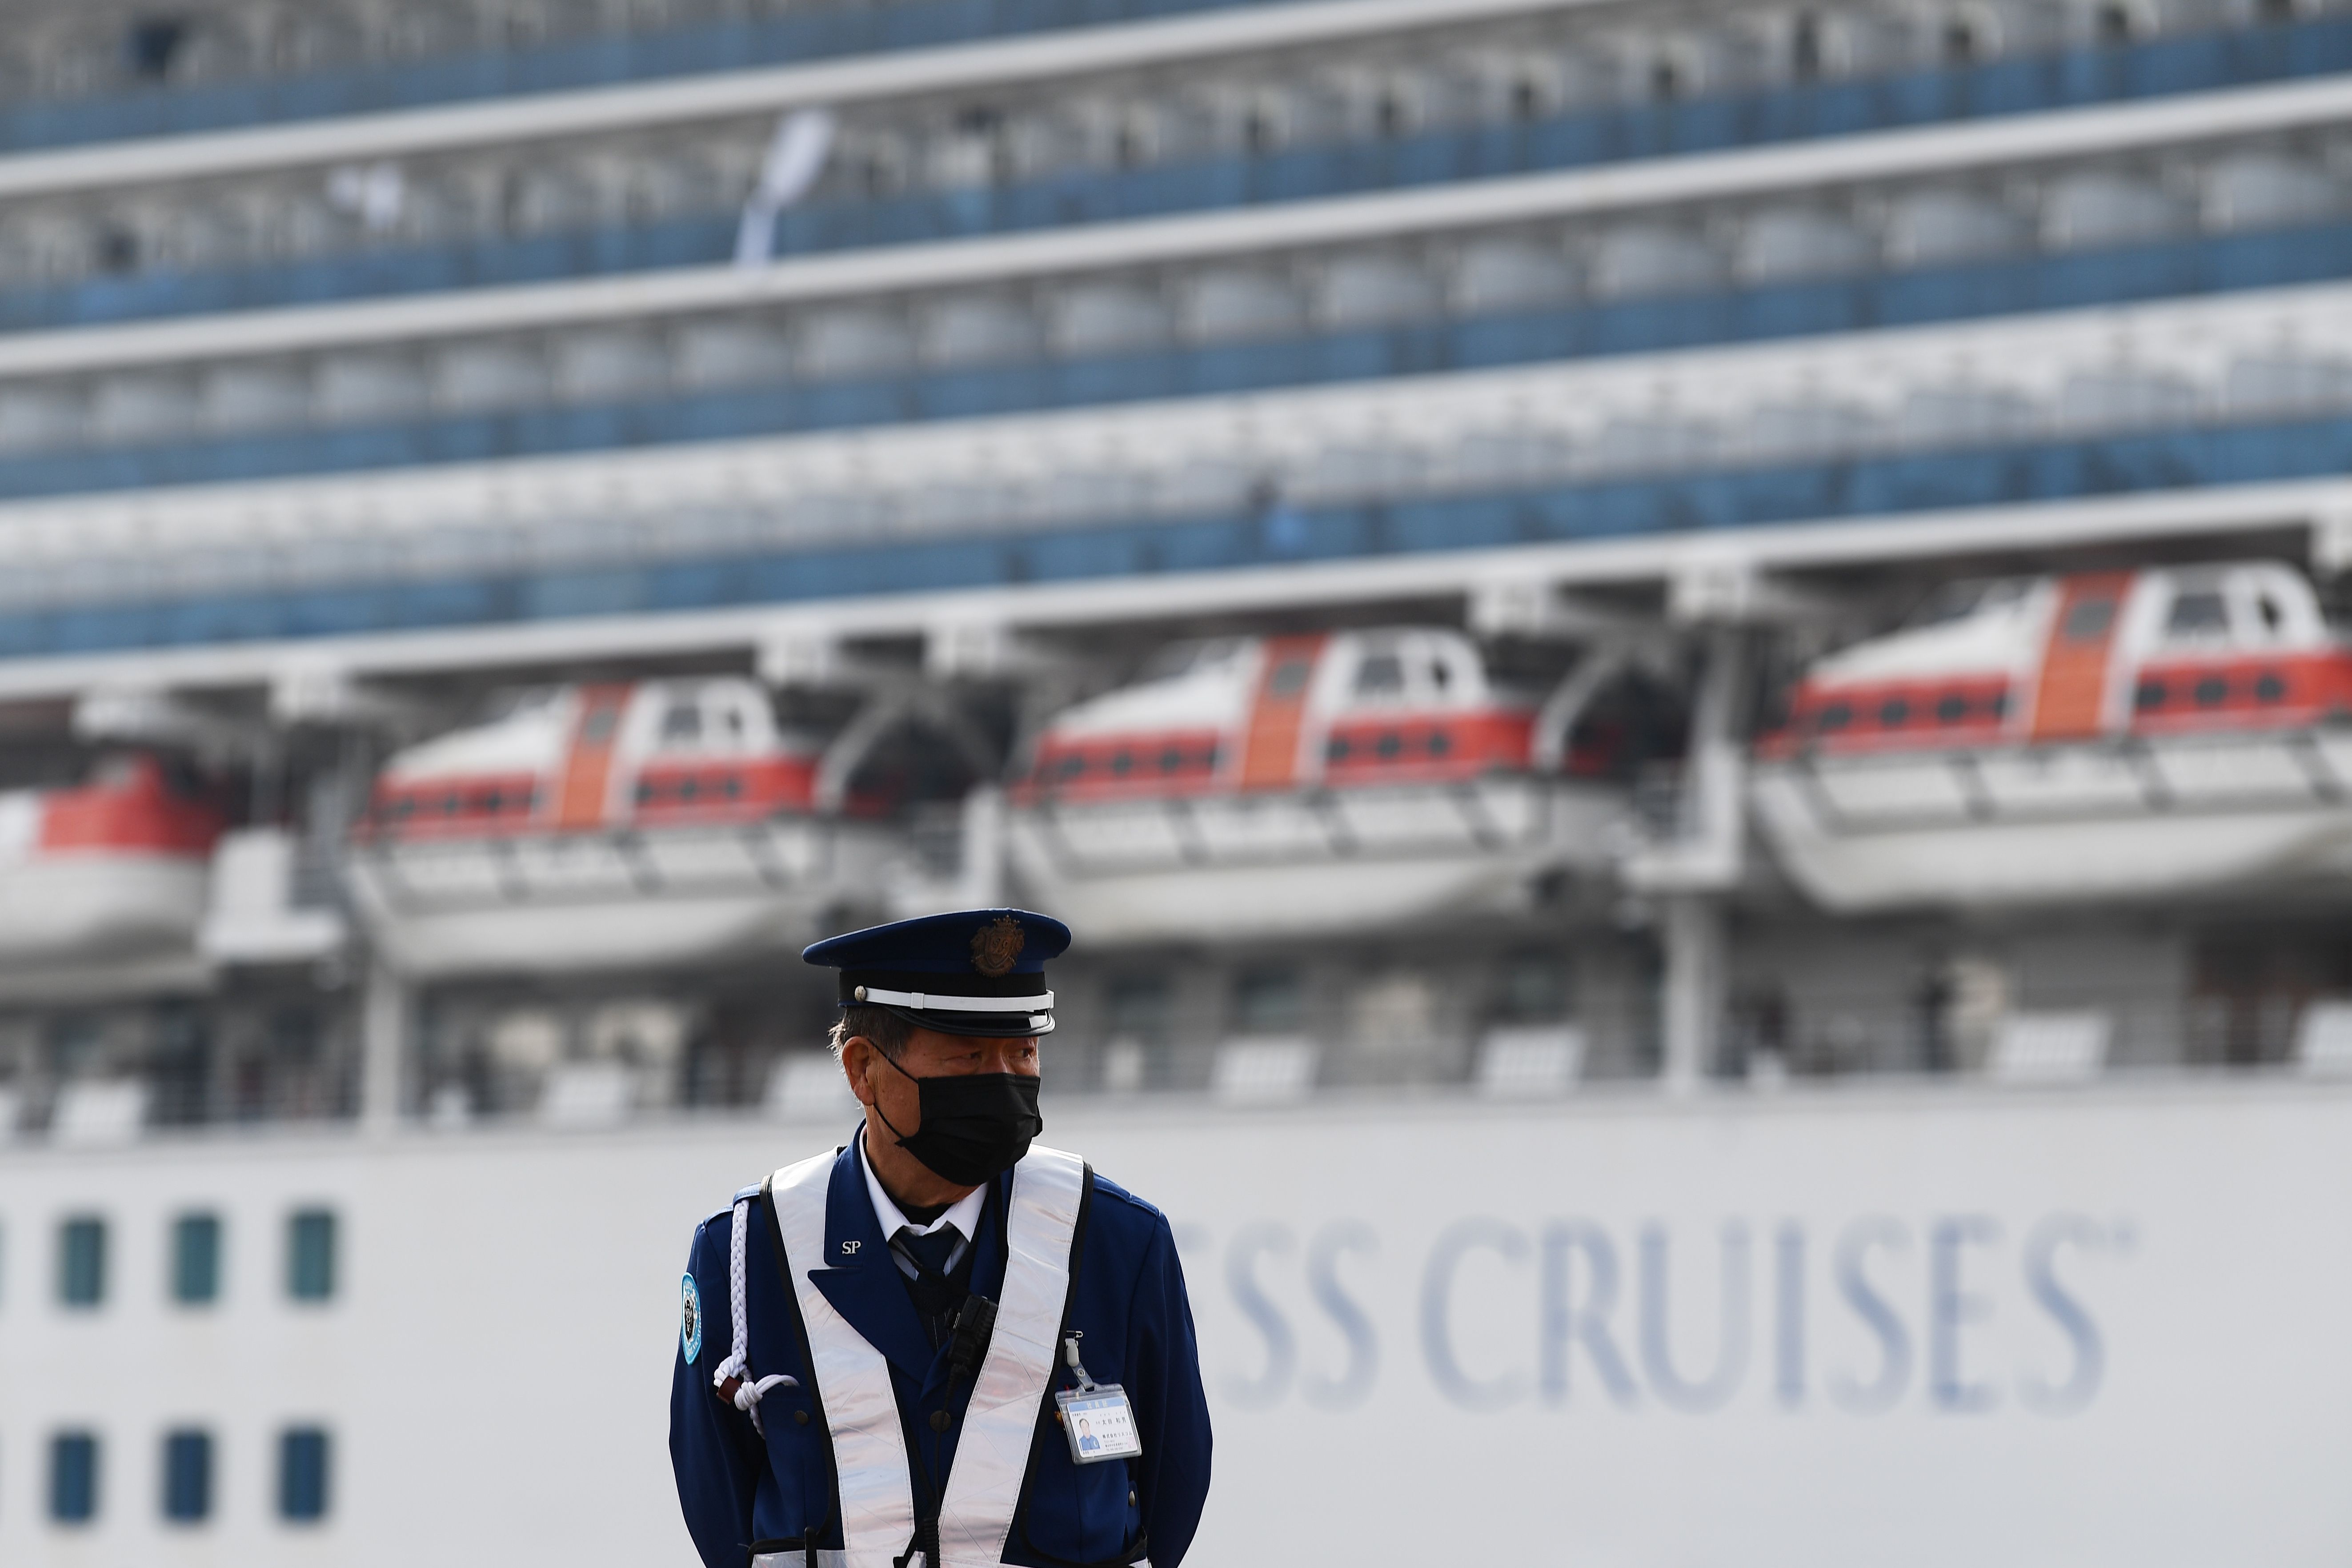 A security guard is seen in front of the Diamond Princess cruise ship at the Daikoku Pier Cruise Terminal in Yokohama port on Feb. 14.